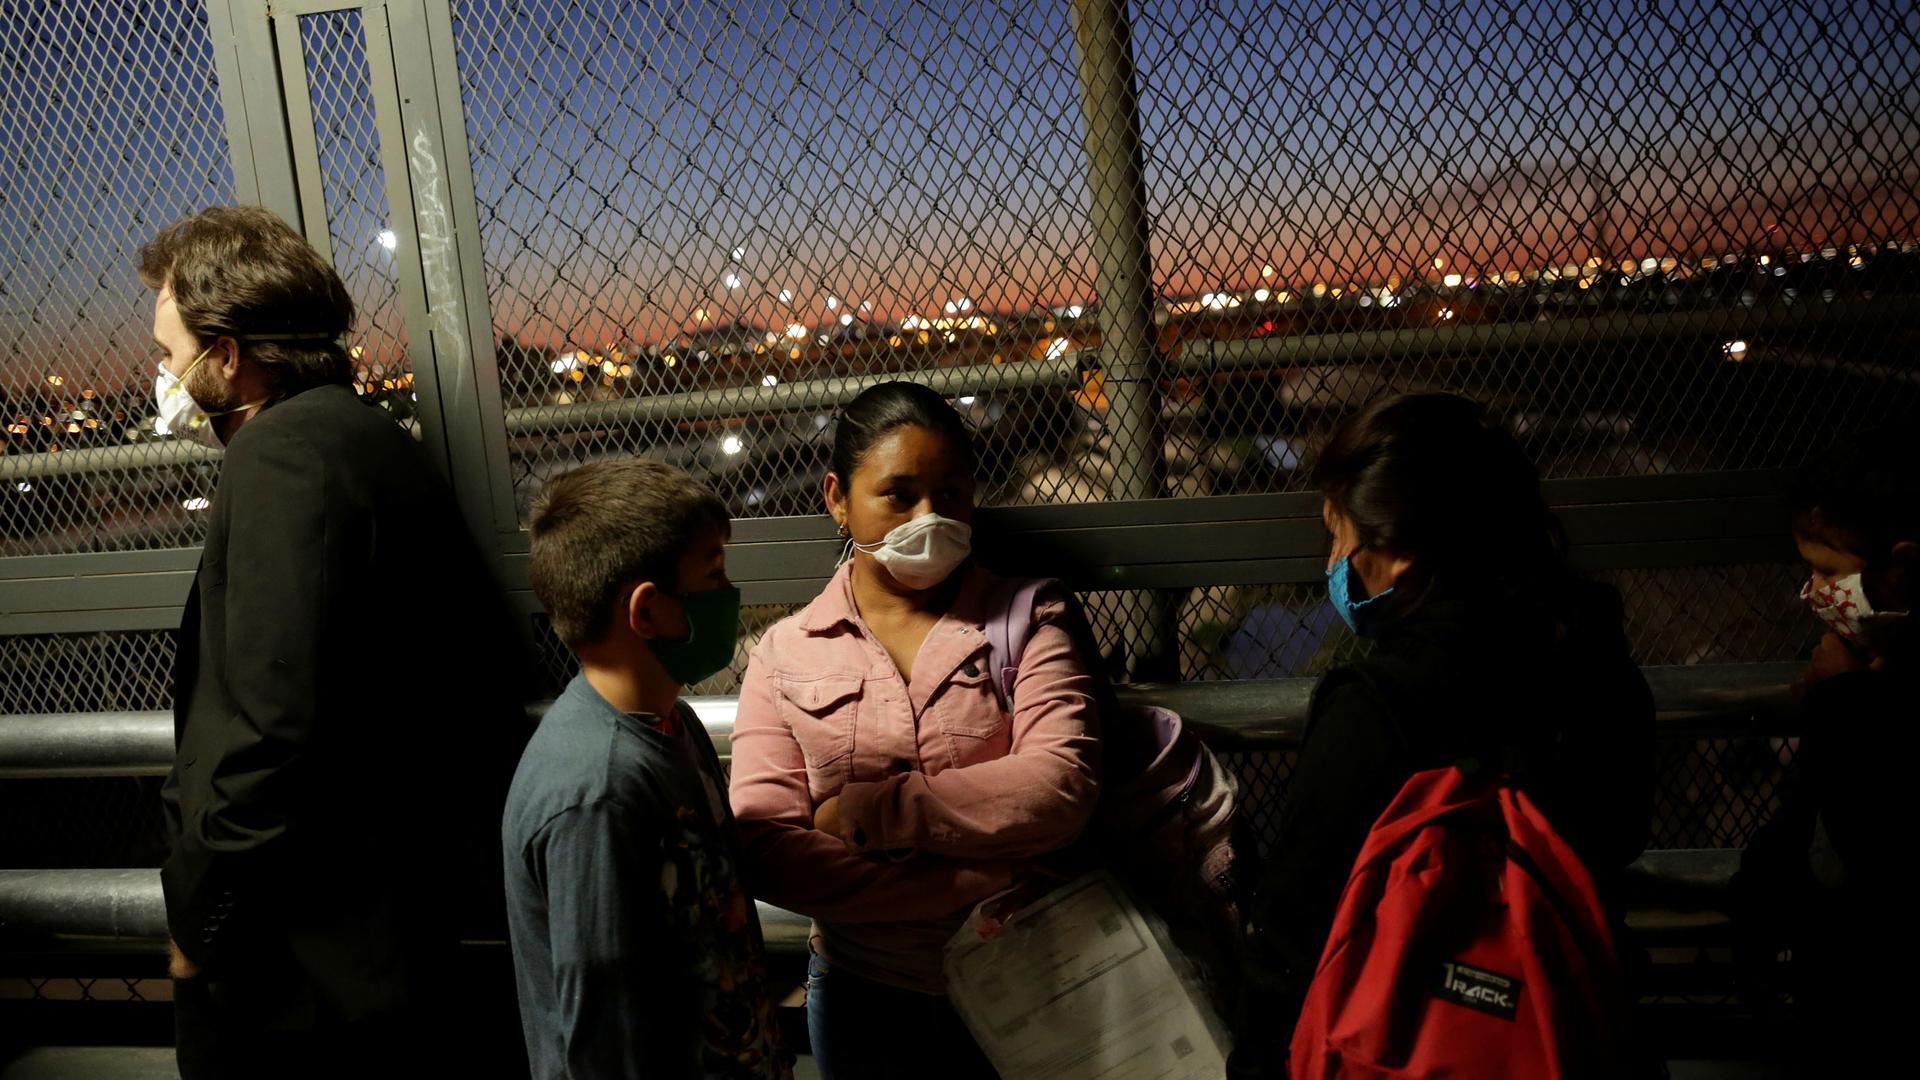 A line of people are shown wearing protective face masks and standing next to a fence.